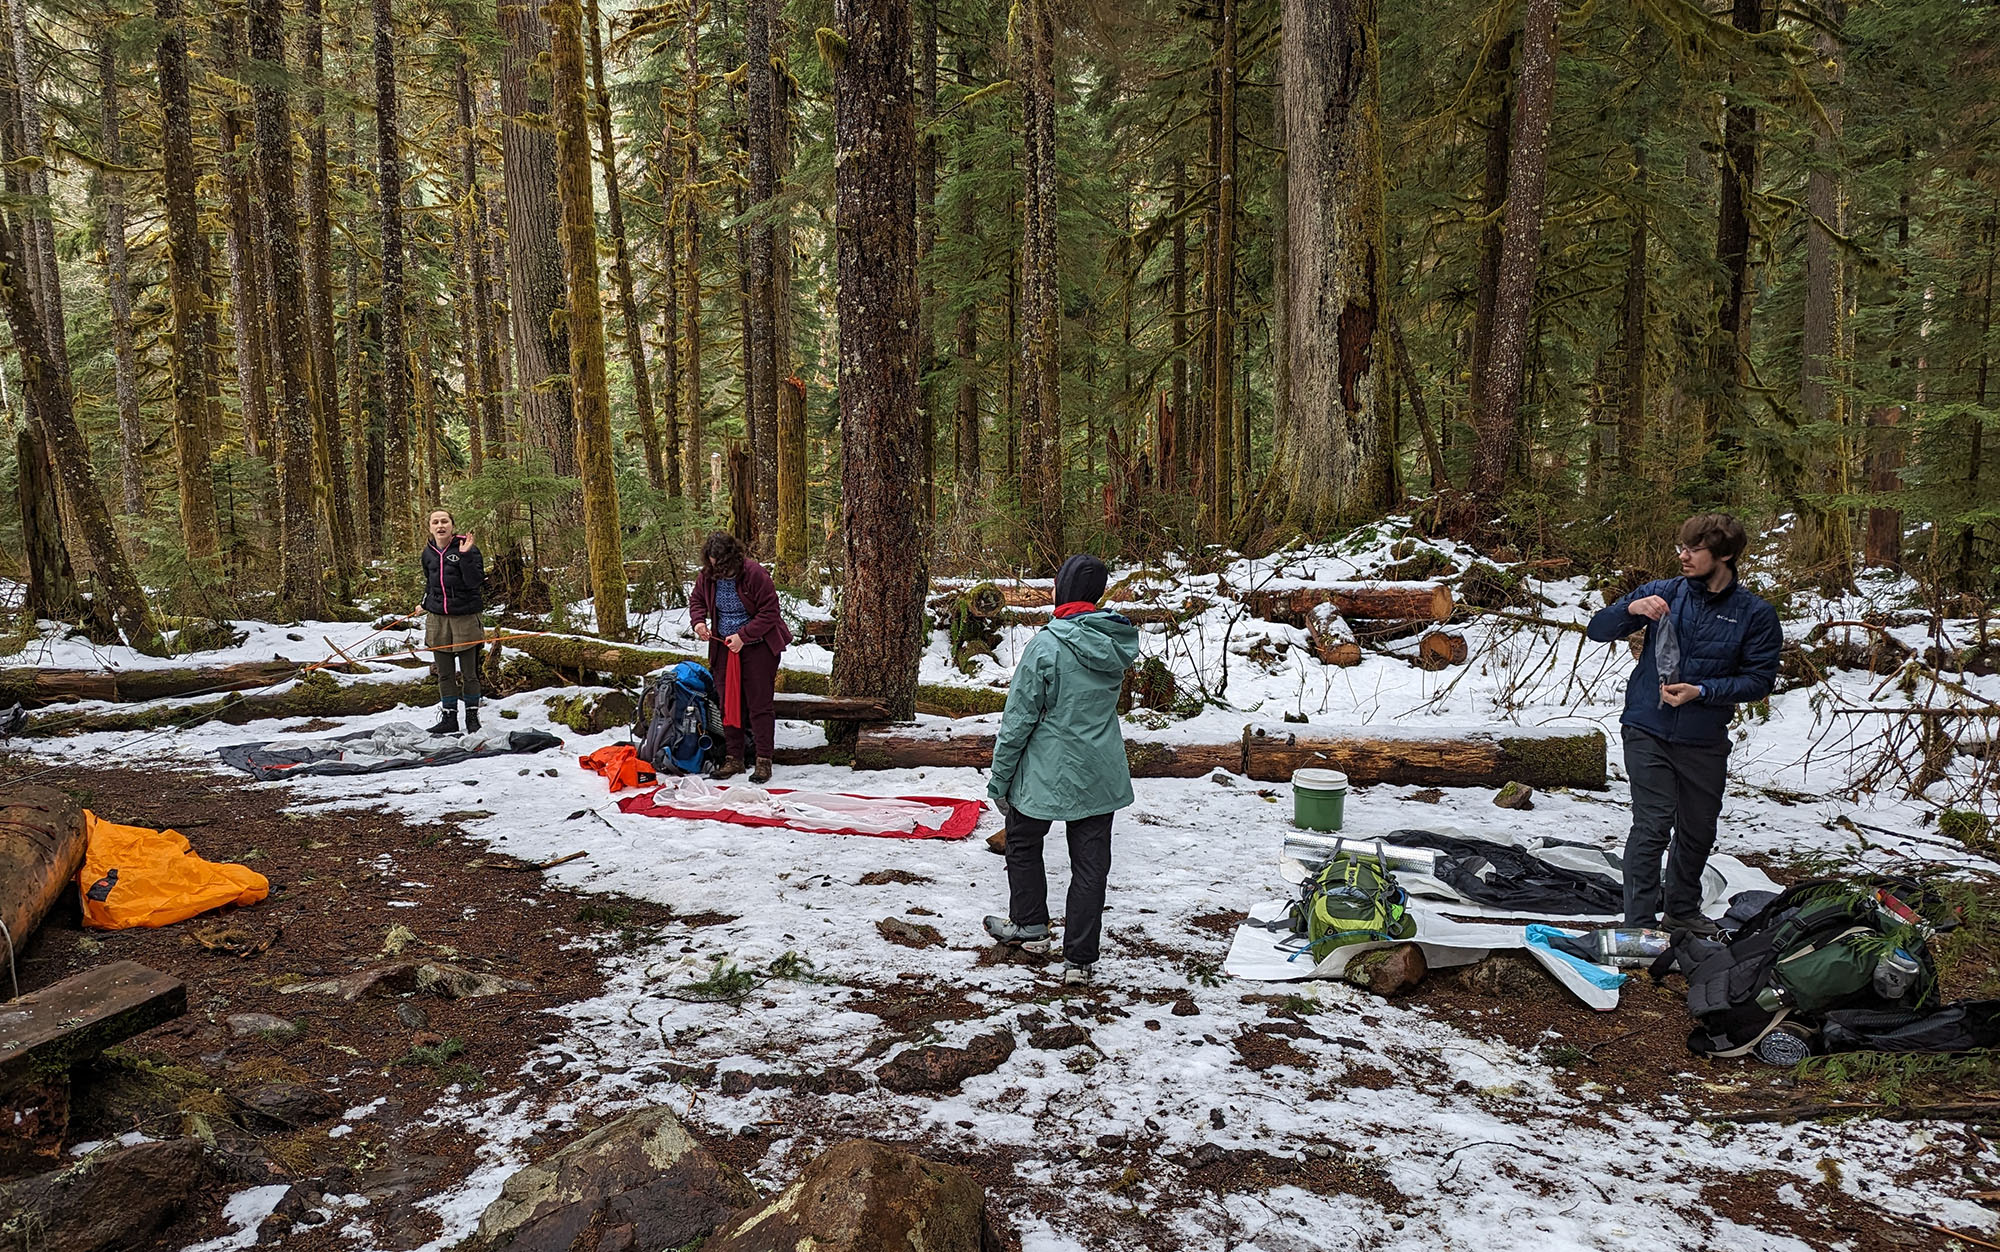 Testing winter tents along the Middle Fork of the Snoqualmie River in Washington State.